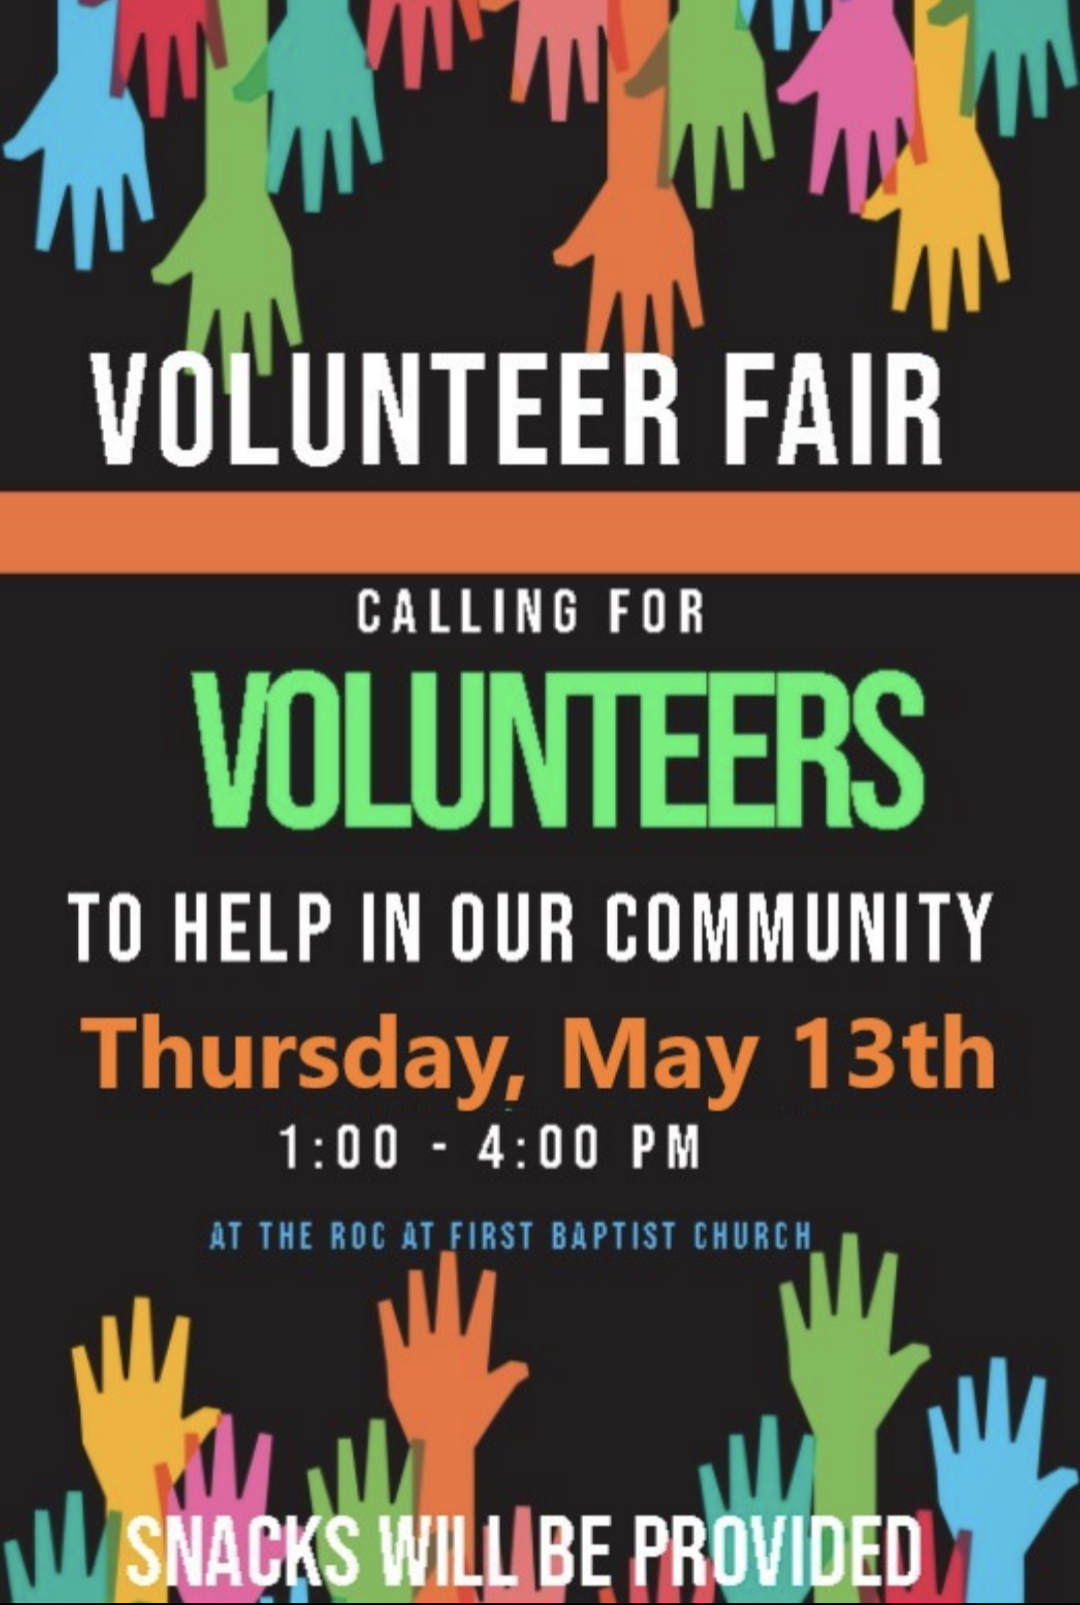 Volunteer Fair Planned for May 13th